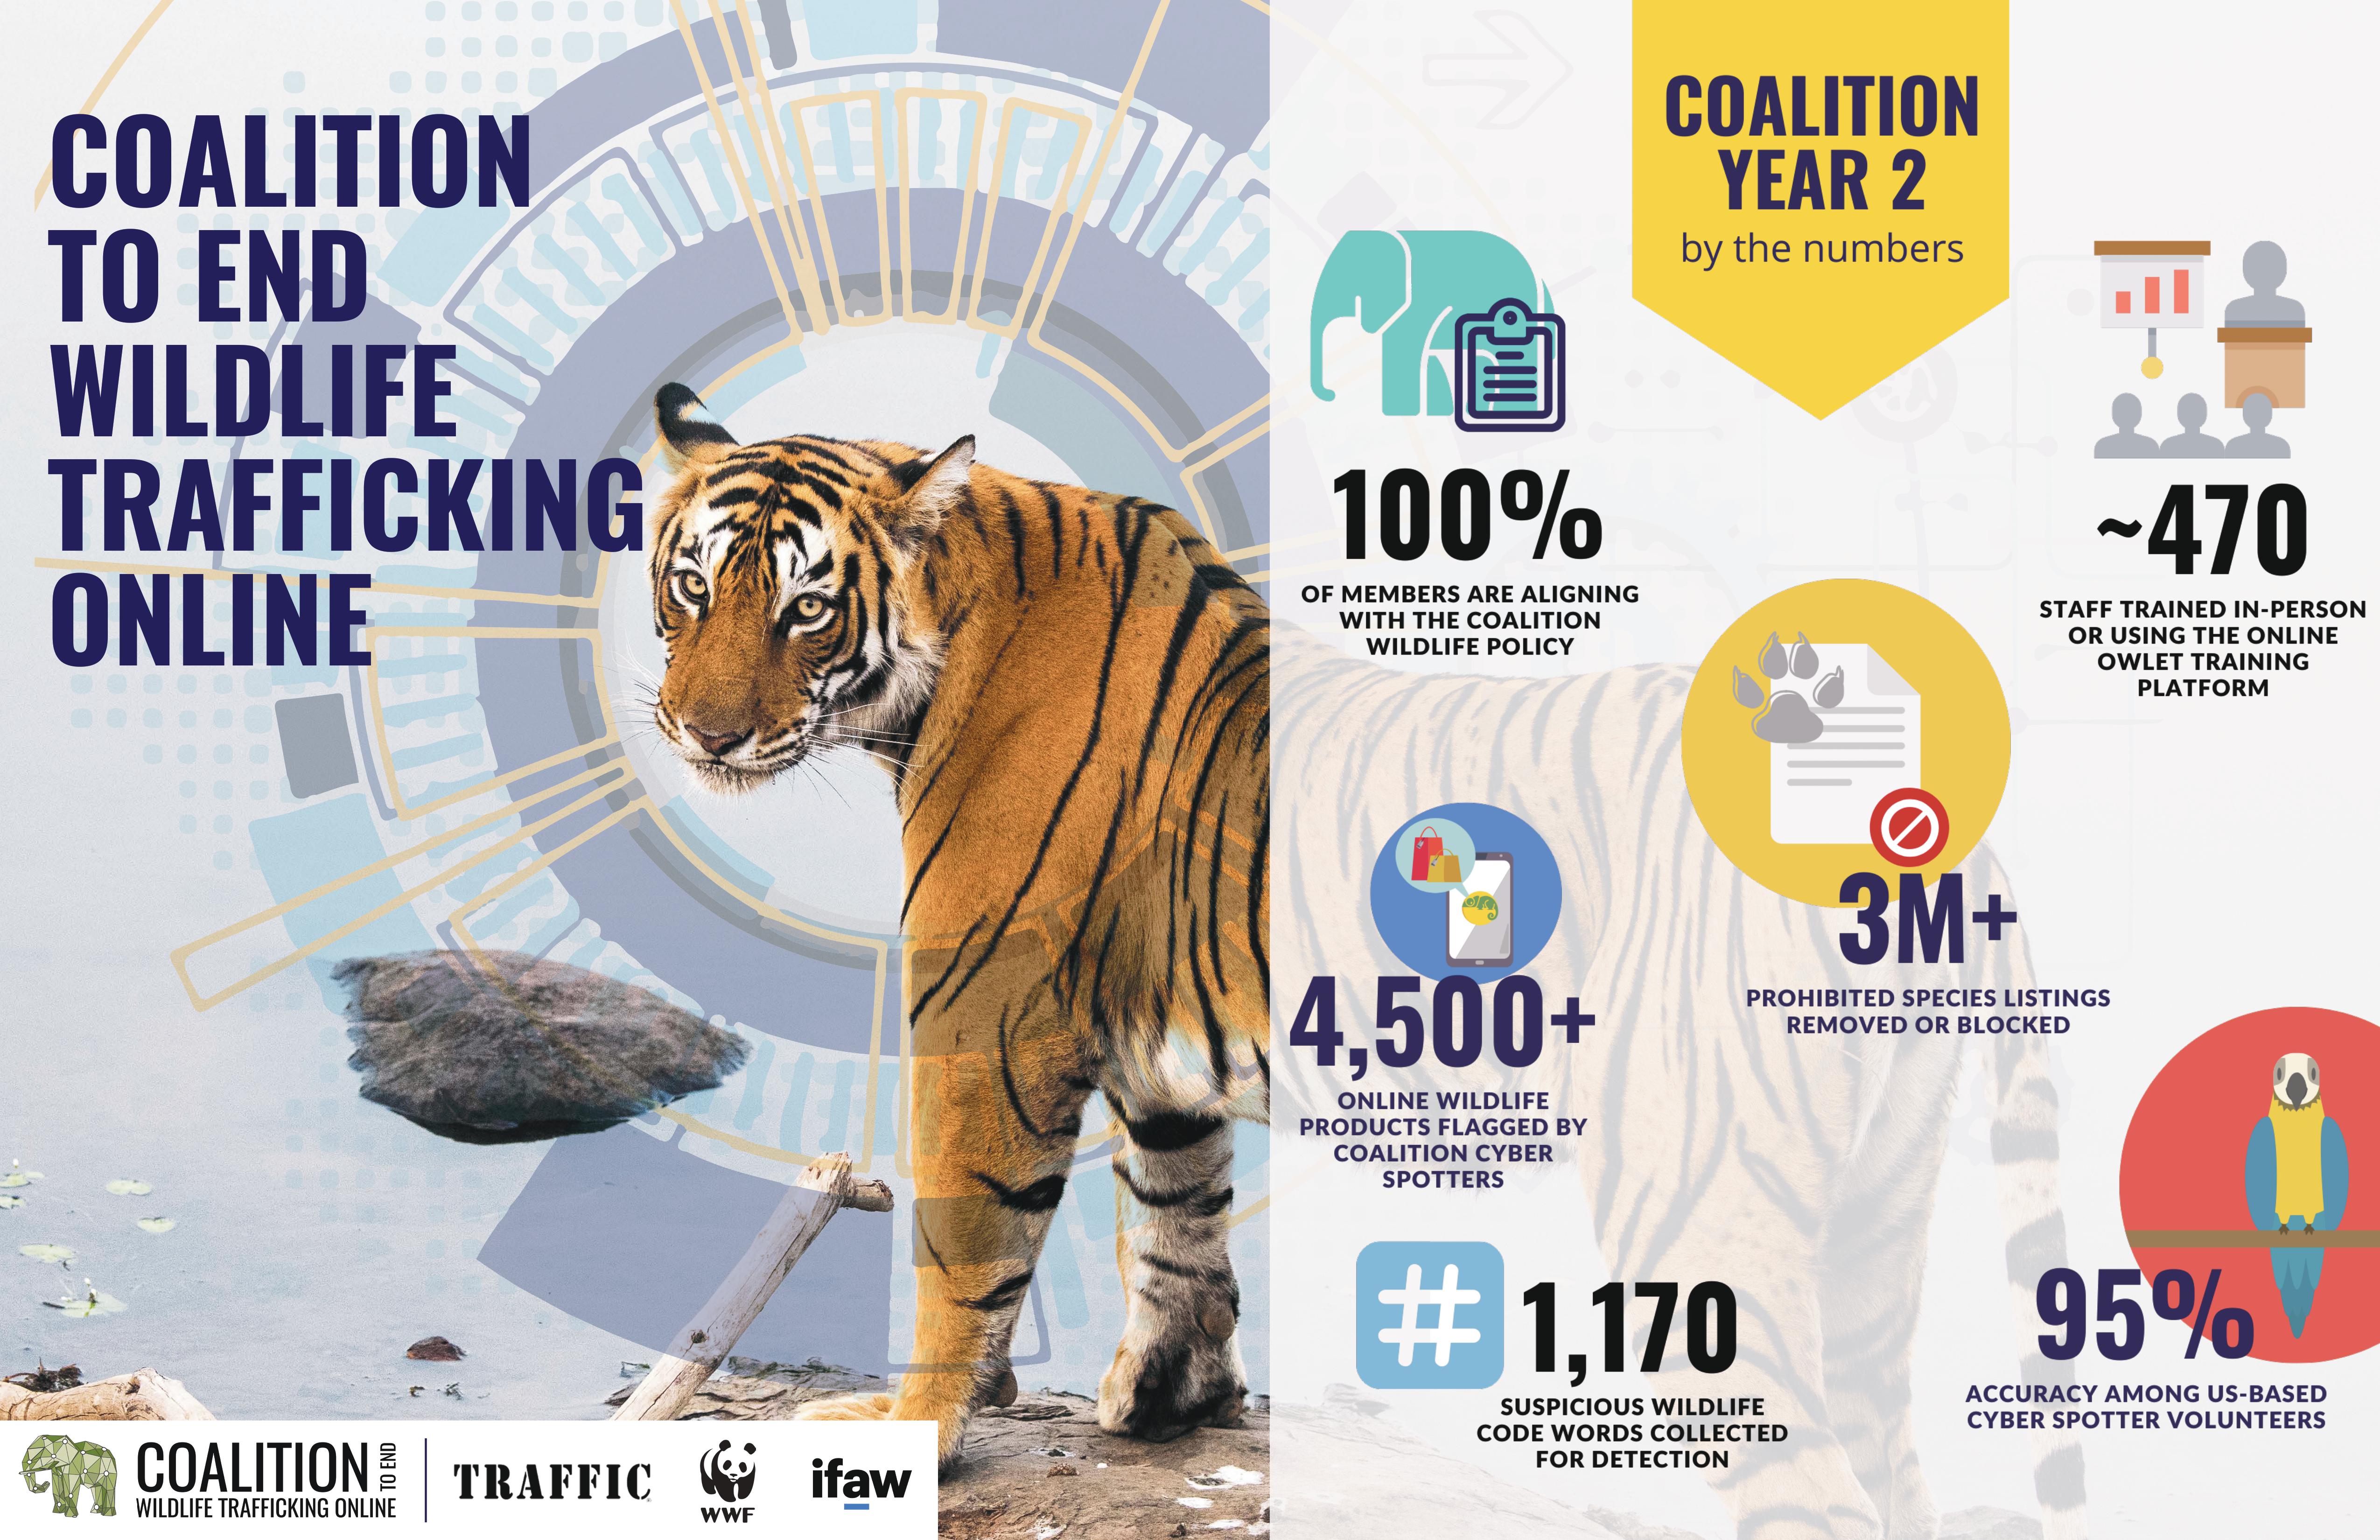 Coalition to End Wildlife Trafficking Online